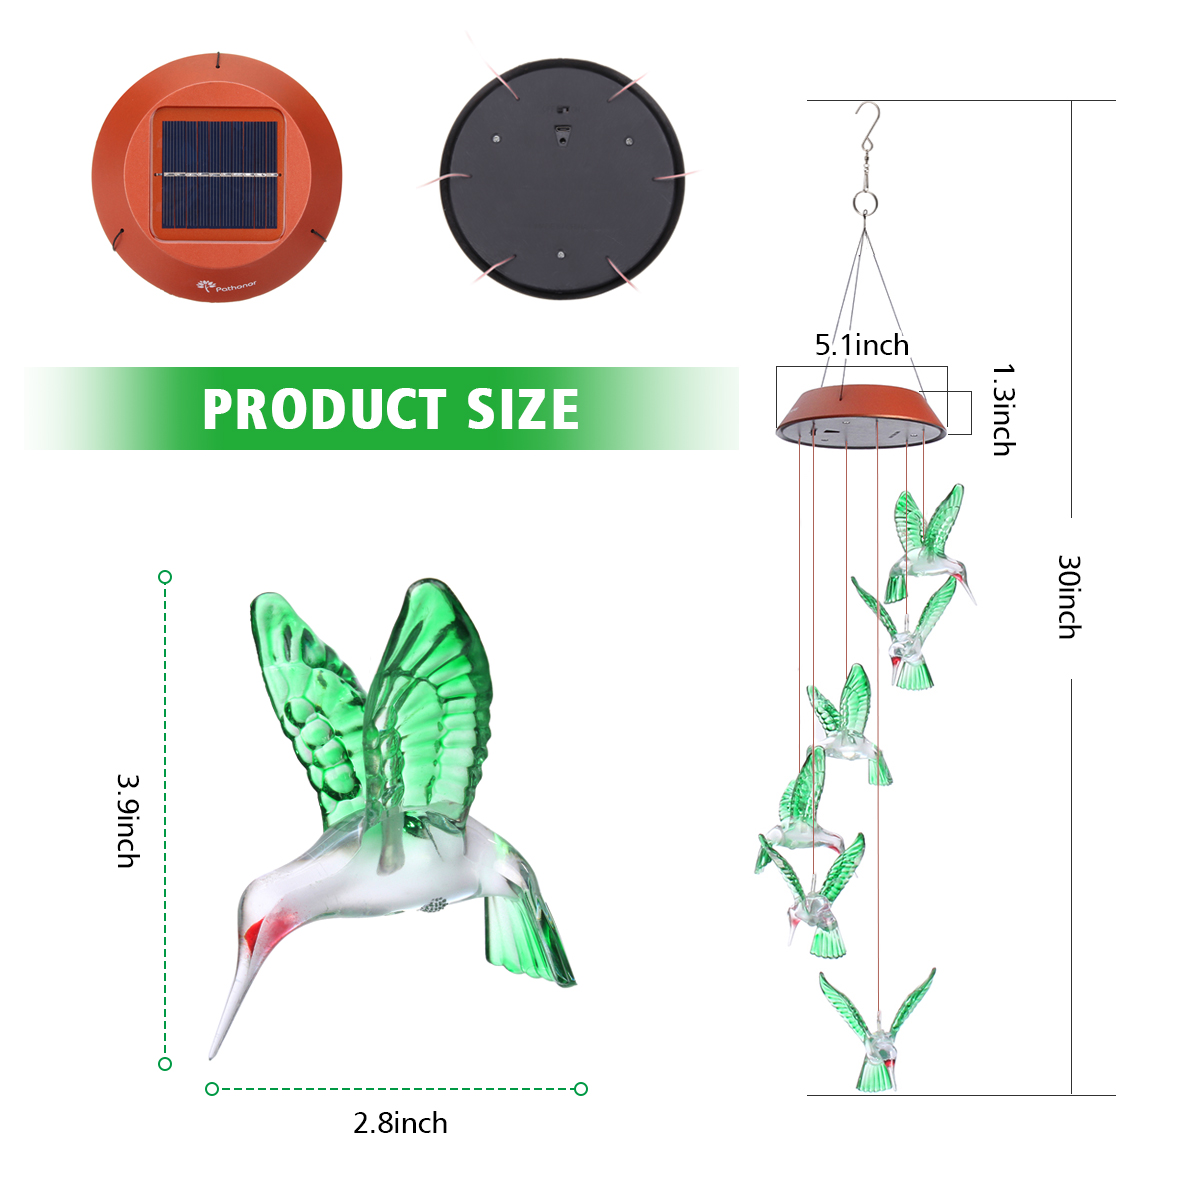 Wind Chime Solar Hummingbird Wind Chimes Outdoor/Indoor Light Color Changing LED Solar Wind Chime Gift for Mom & Grandma for Decor Yard Decorations